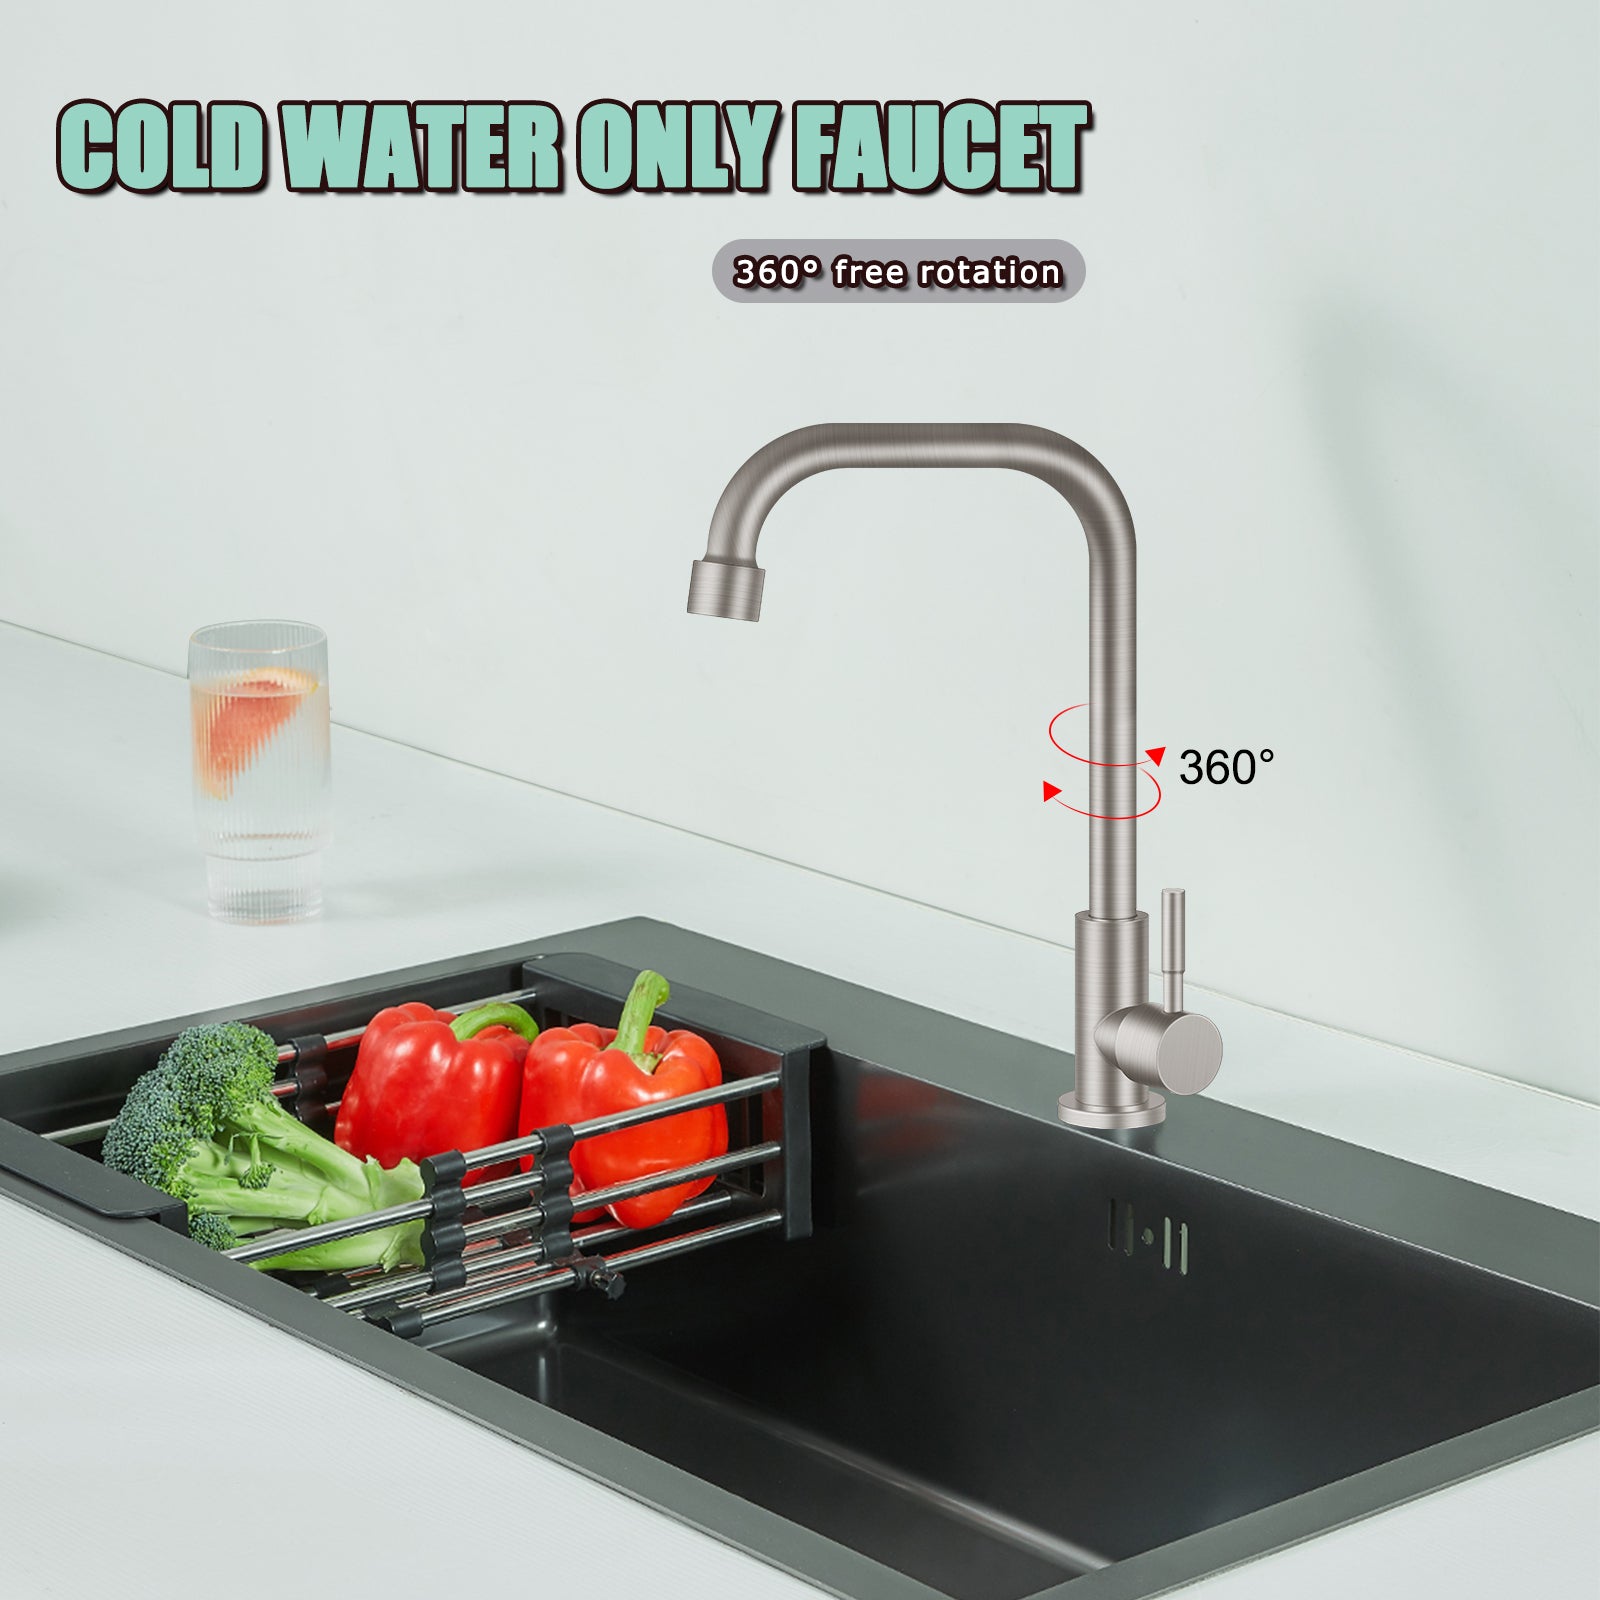 Cold Only Water Kitchen Faucet Heyalan Single Lever Handle 304 Stainless Steel Commercial Bar Tap Decked Mounted 360 Degree Swivel Spout Longer Thread Pipe